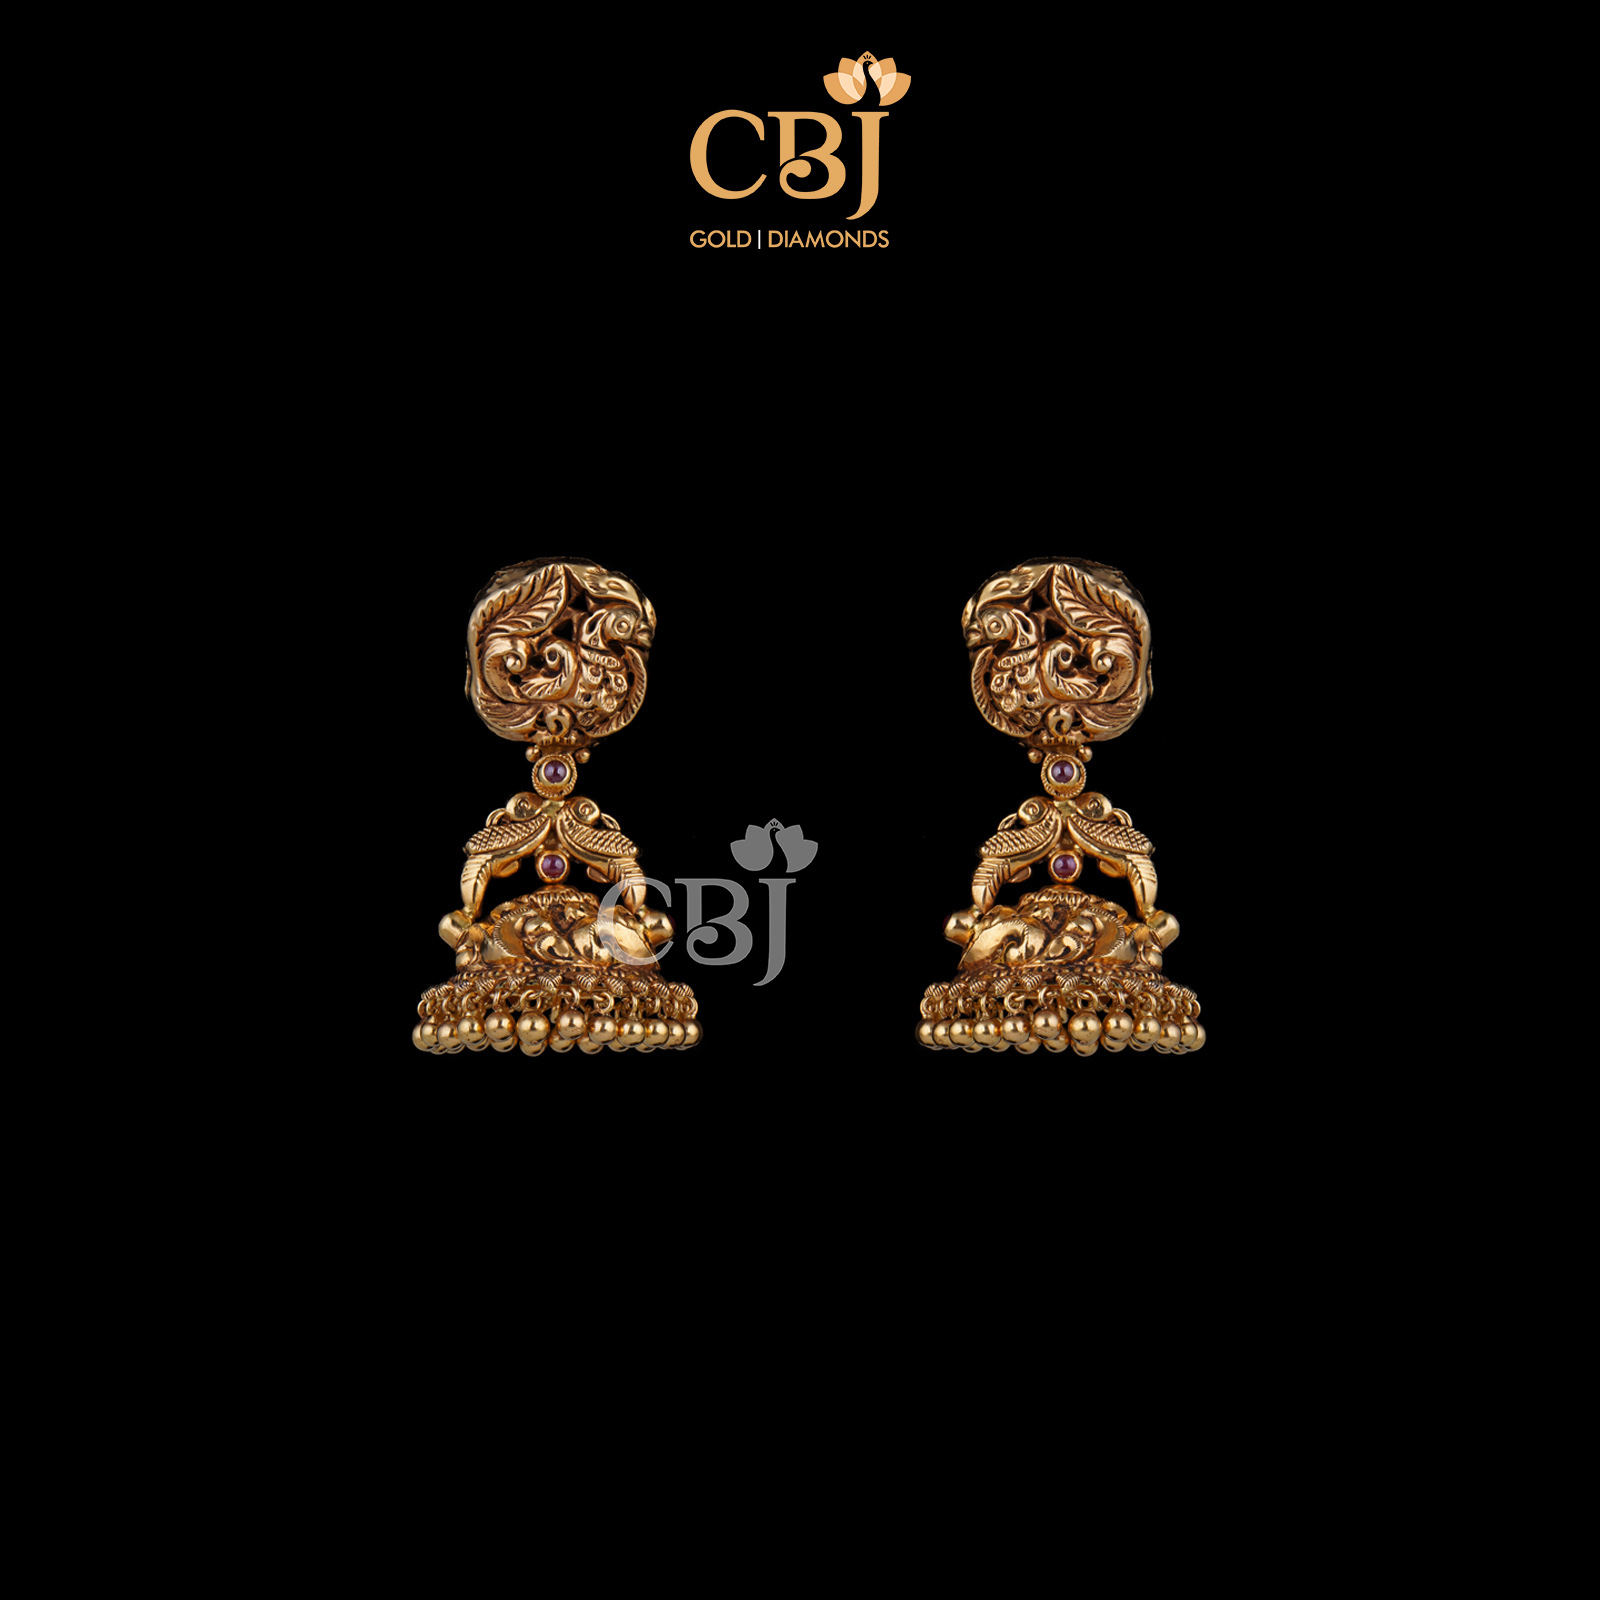 AD Small Jhumkas women at affordable price - Trink Wink Jewels